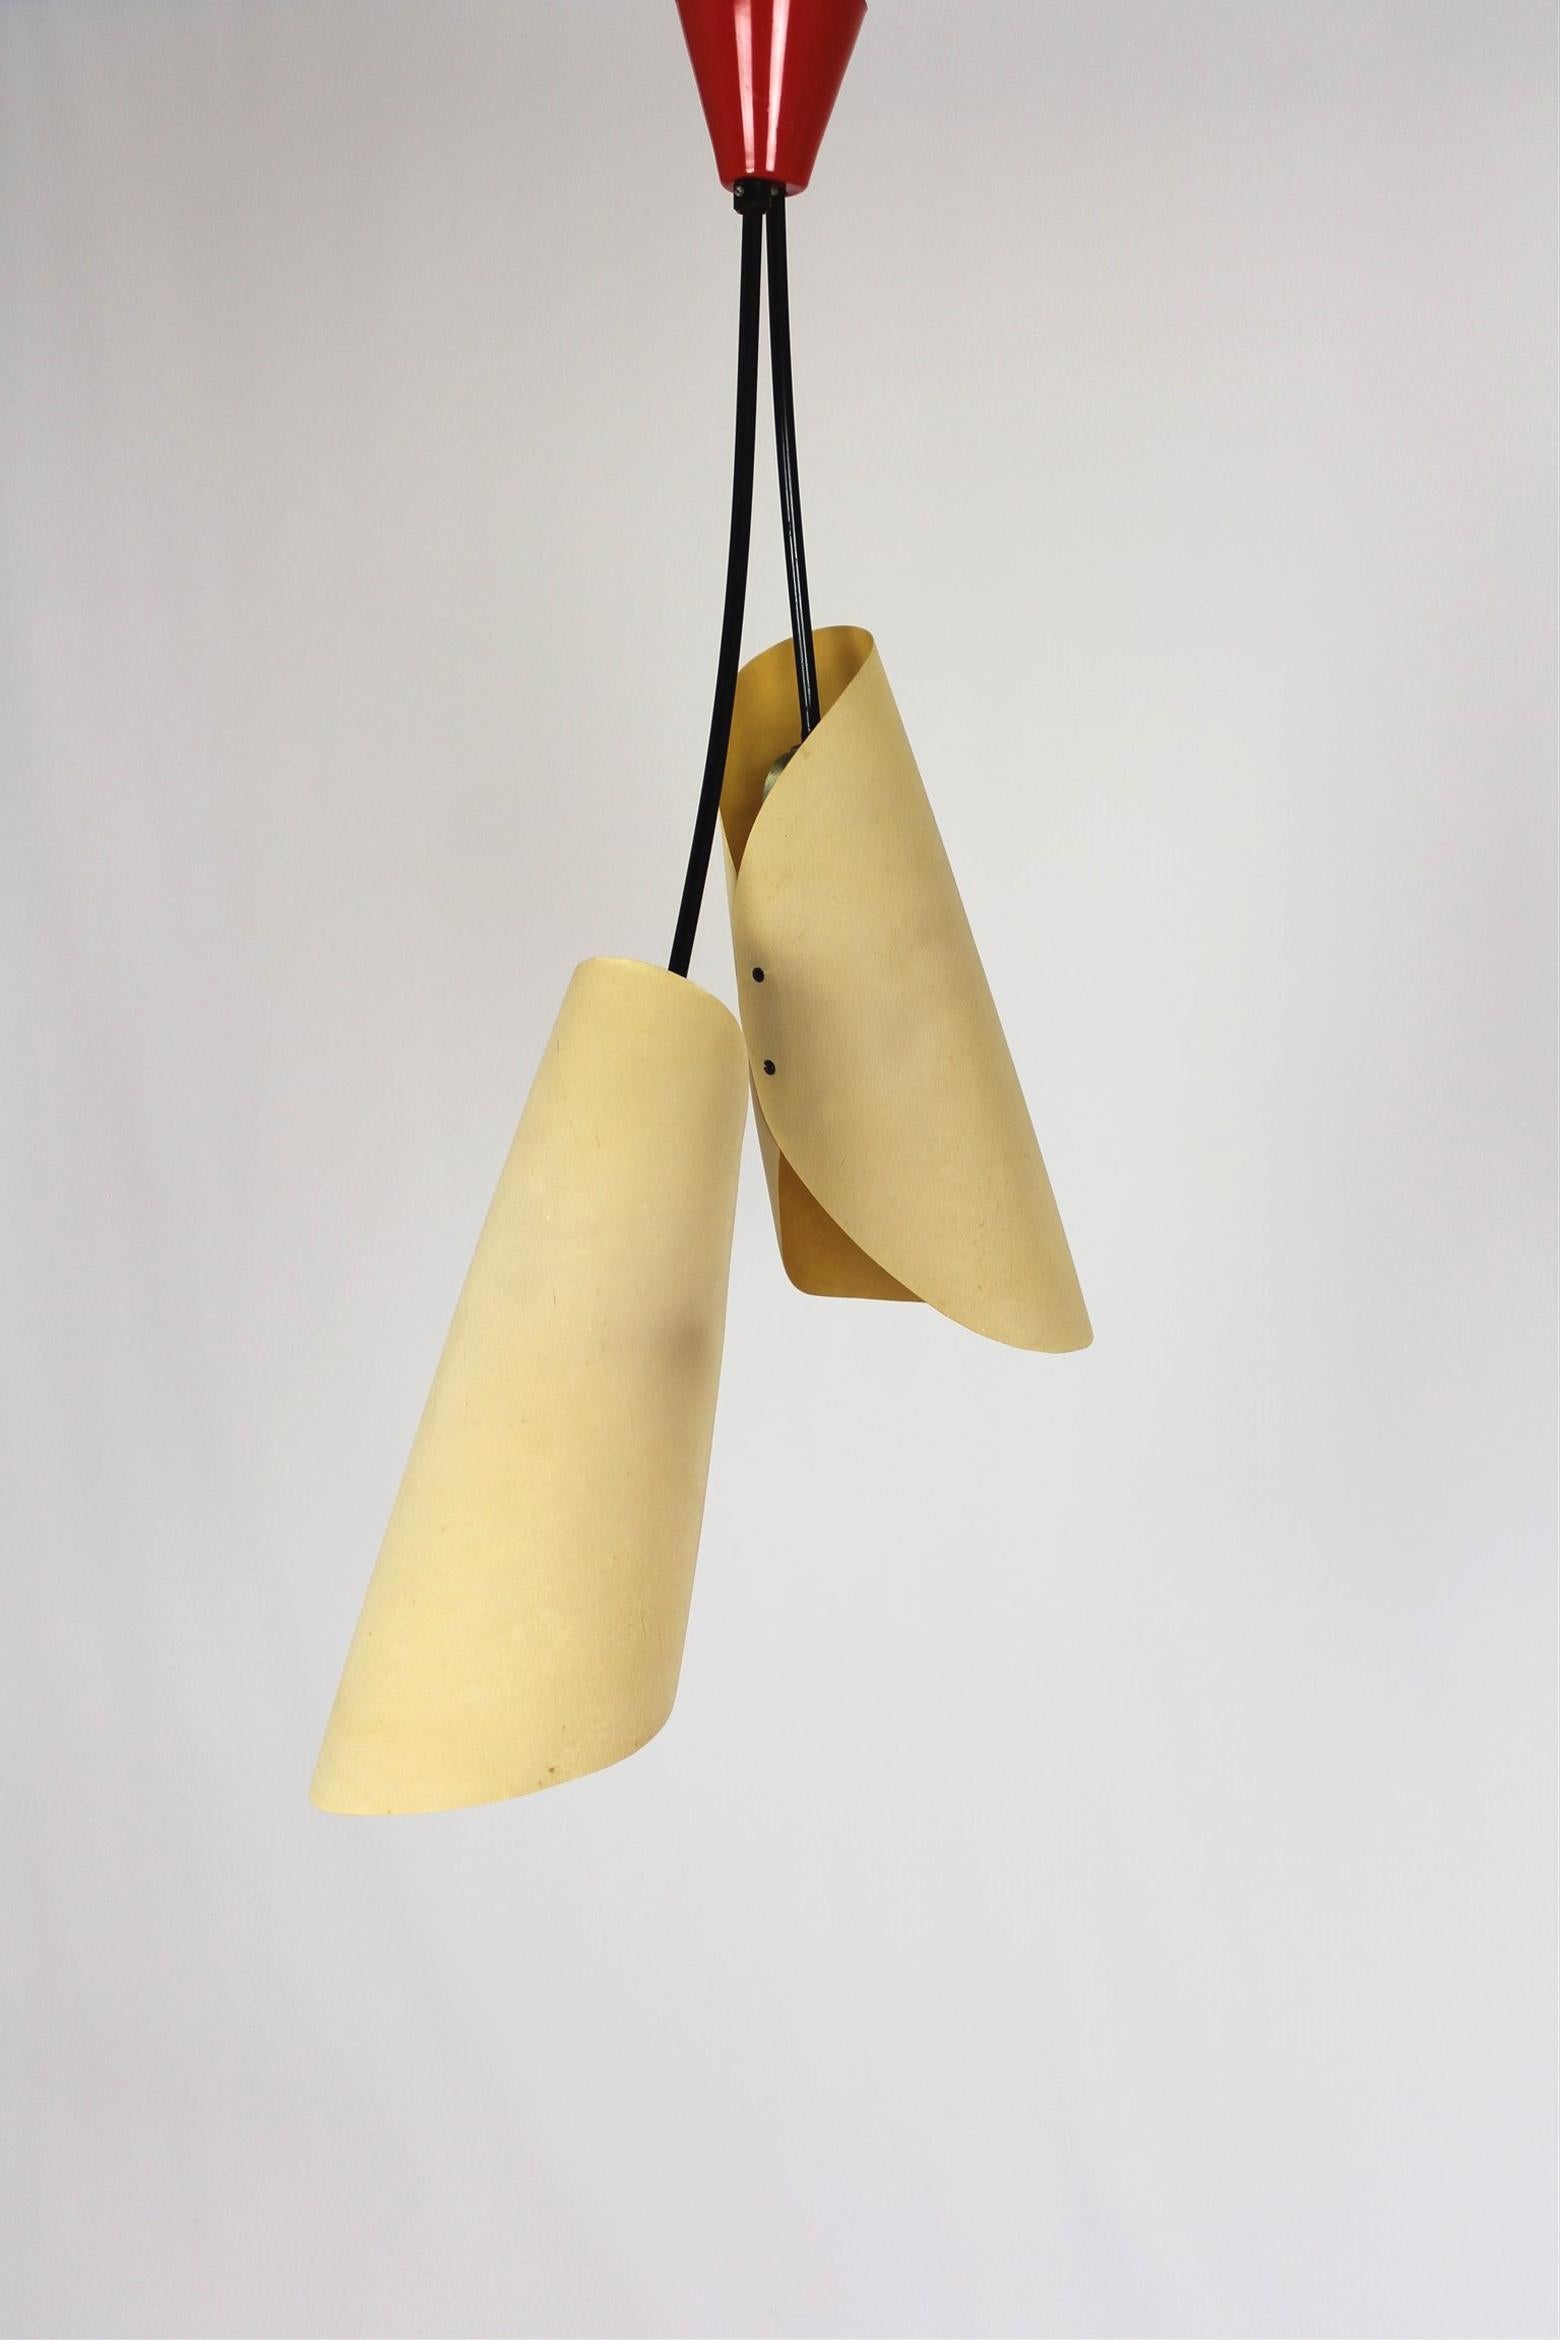 Mid-Century Pendant Lamp by Josef Hurka for Napako, 1960s In Good Condition For Sale In Żory, PL